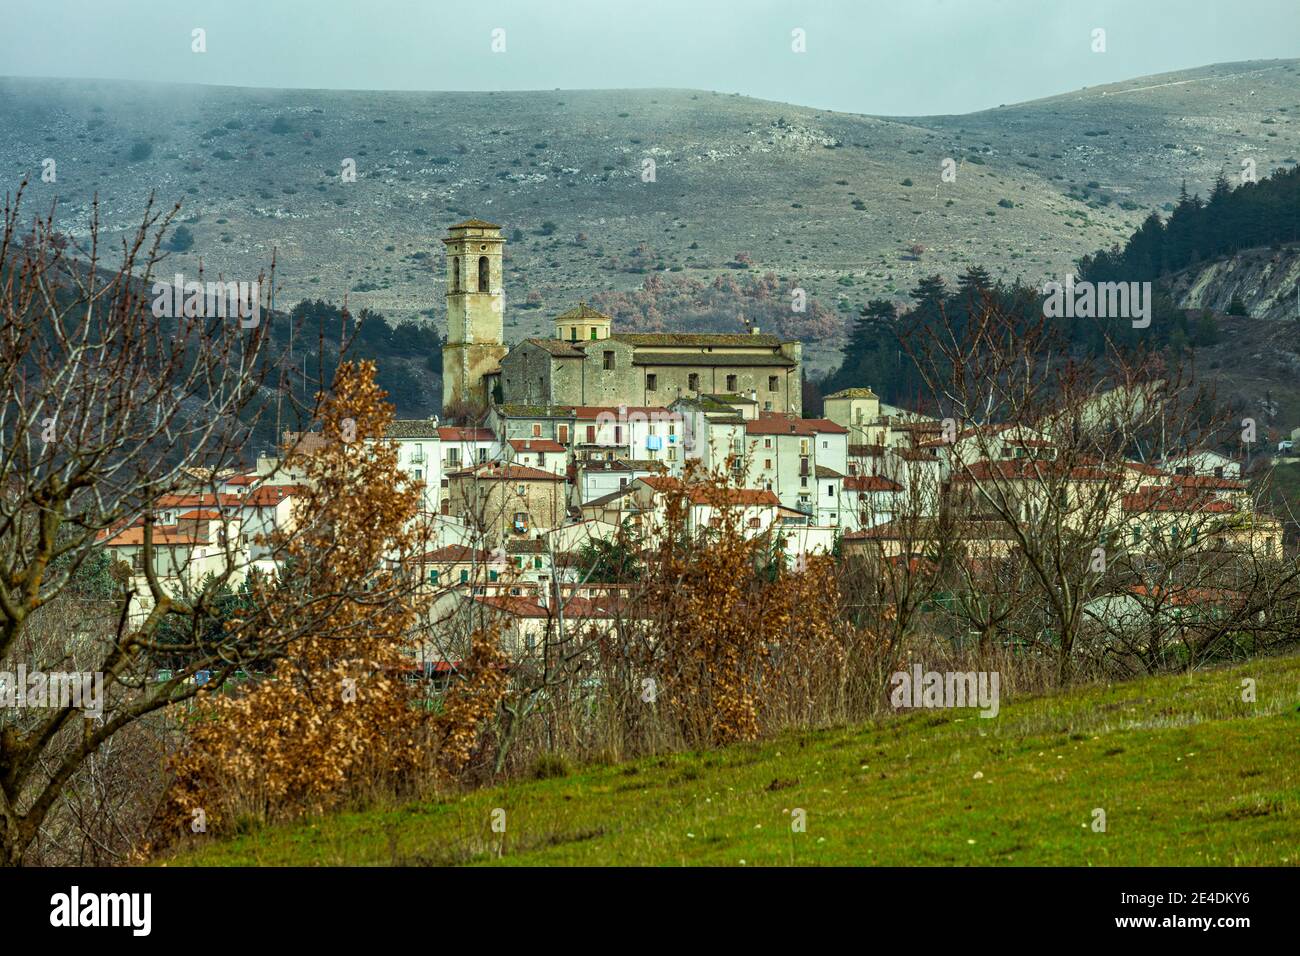 the small village of Goriano Sicoli place among the mountains of the Regional Natural Park of Sirente Velino. Stock Photo